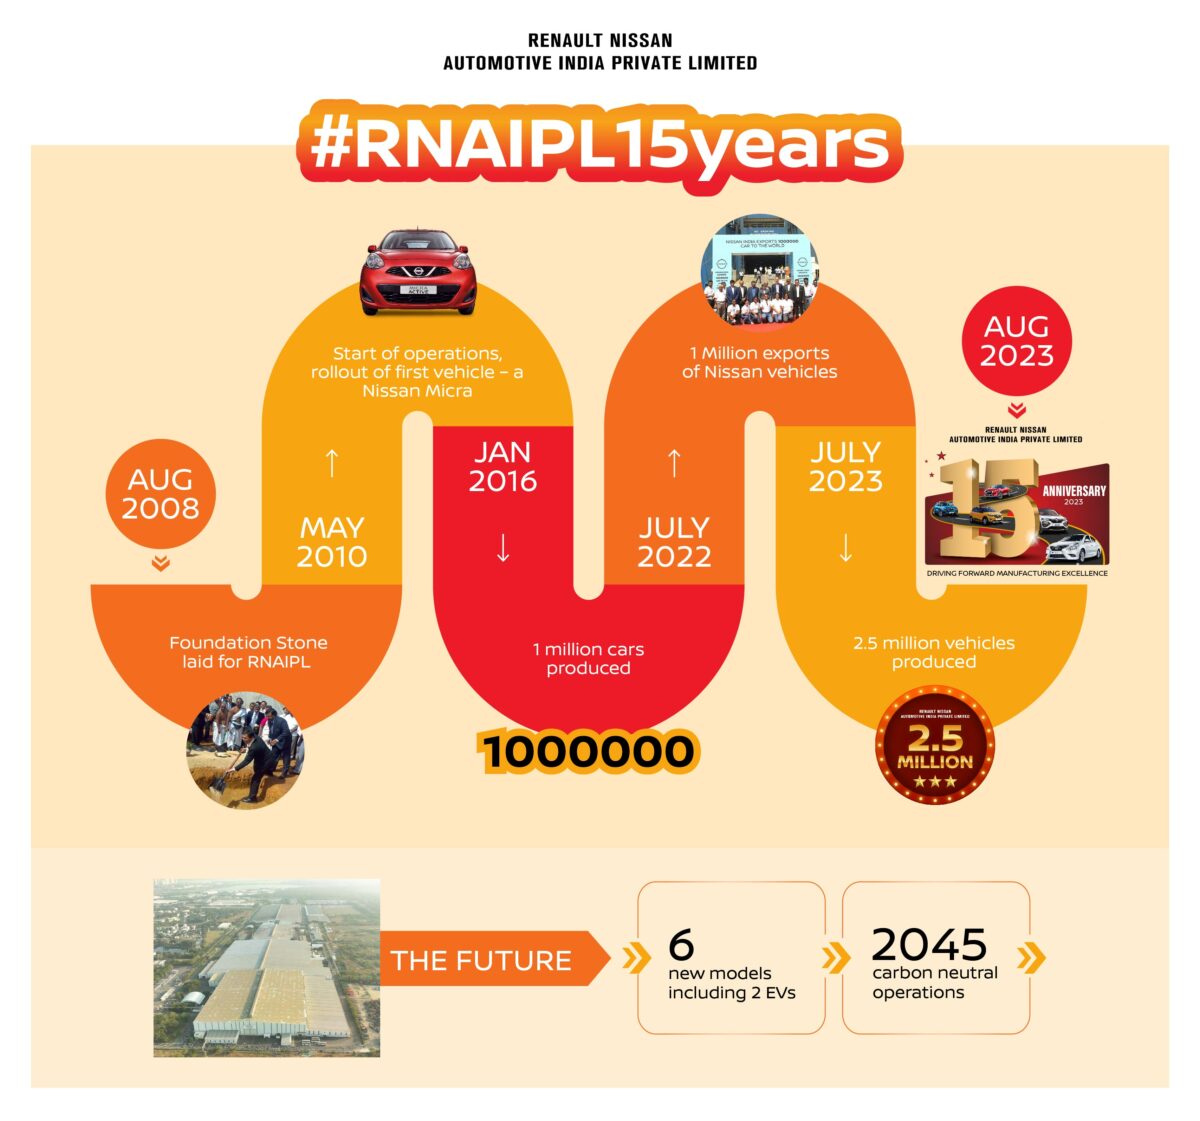 Renault-Nissan-RNAIPL-Infographic-Final-15-years-scaled.